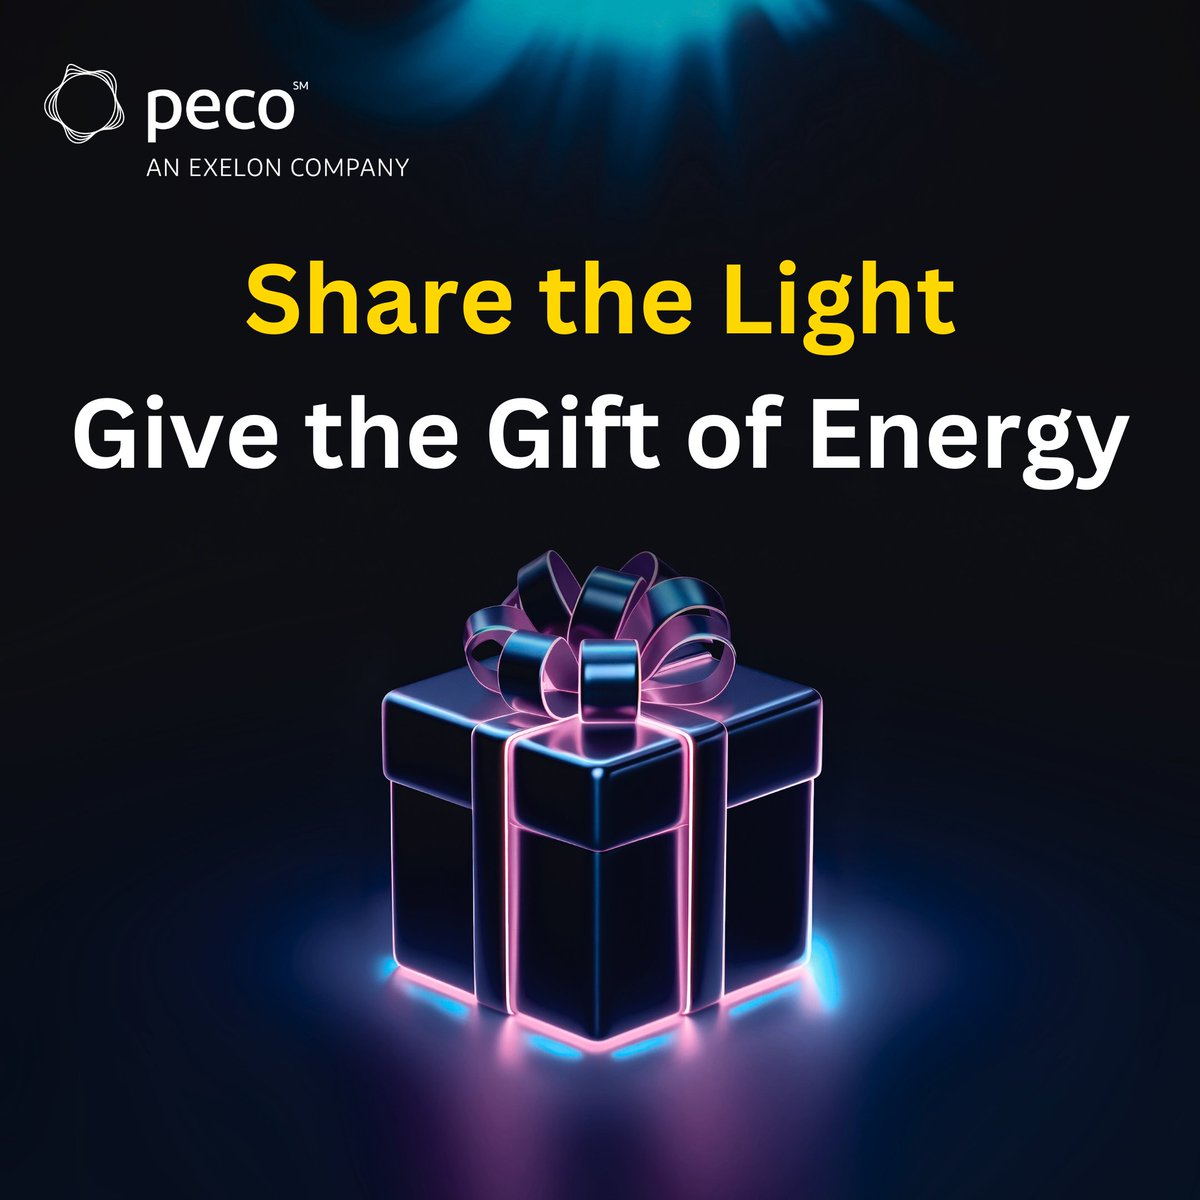 Did you know you can pay someone's PECO bill!? Share the Light! Give the “Gift of Energy” today! For more information visit PECO.com/gift!